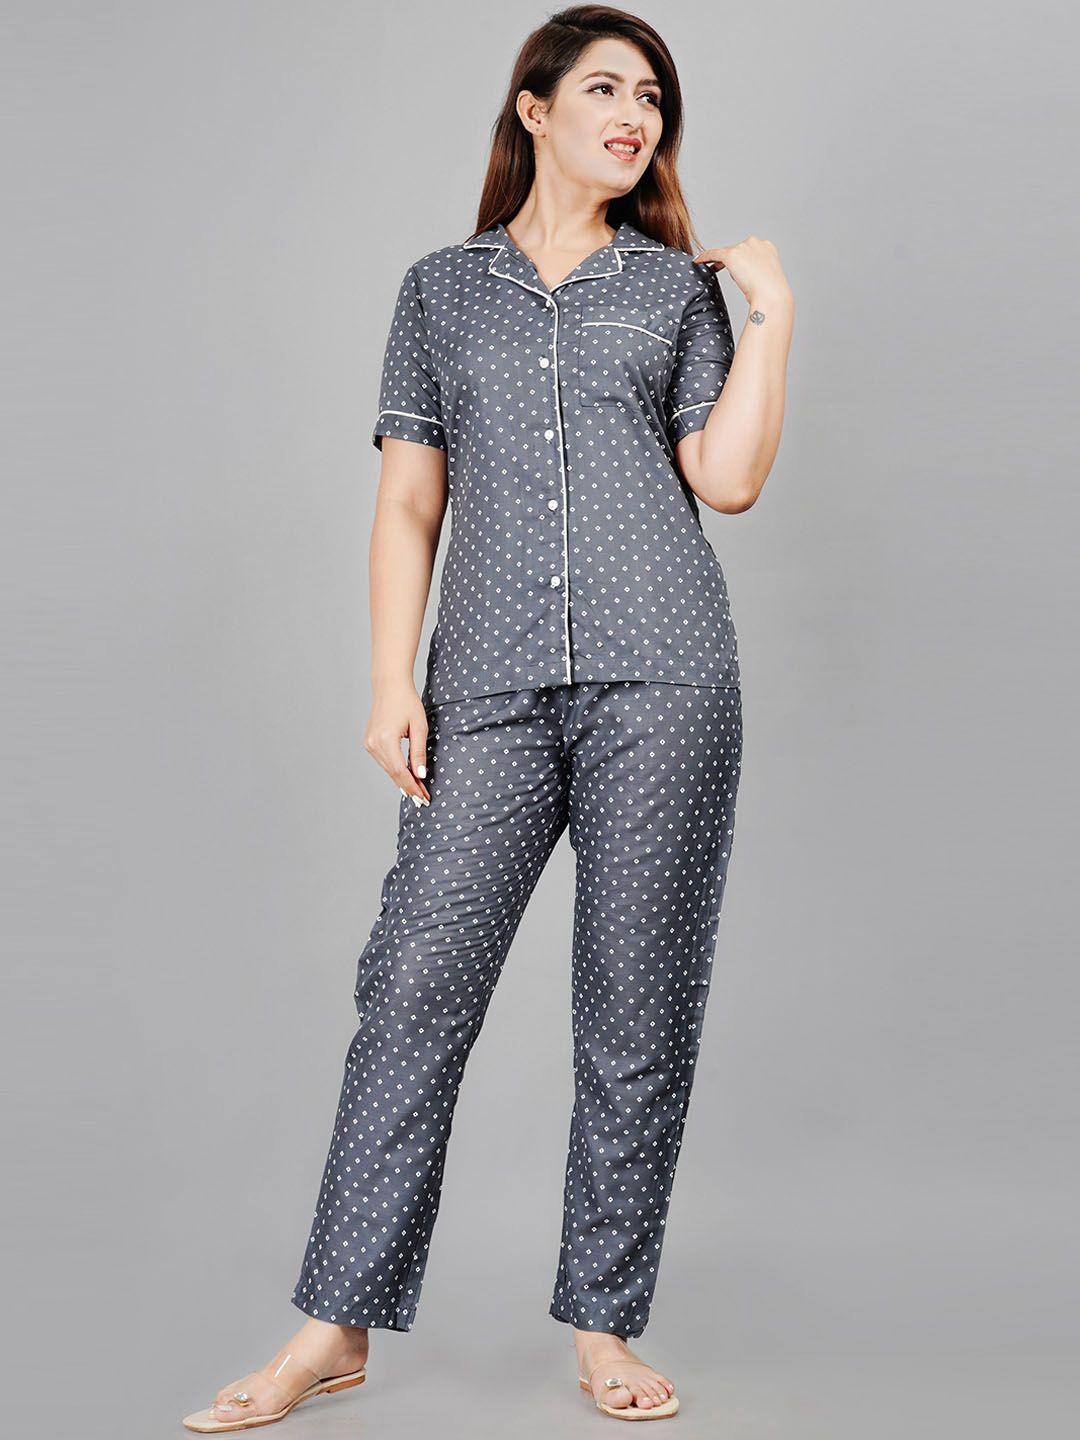 TREND ME Polka Dots Printed Pure Cotton Night suit